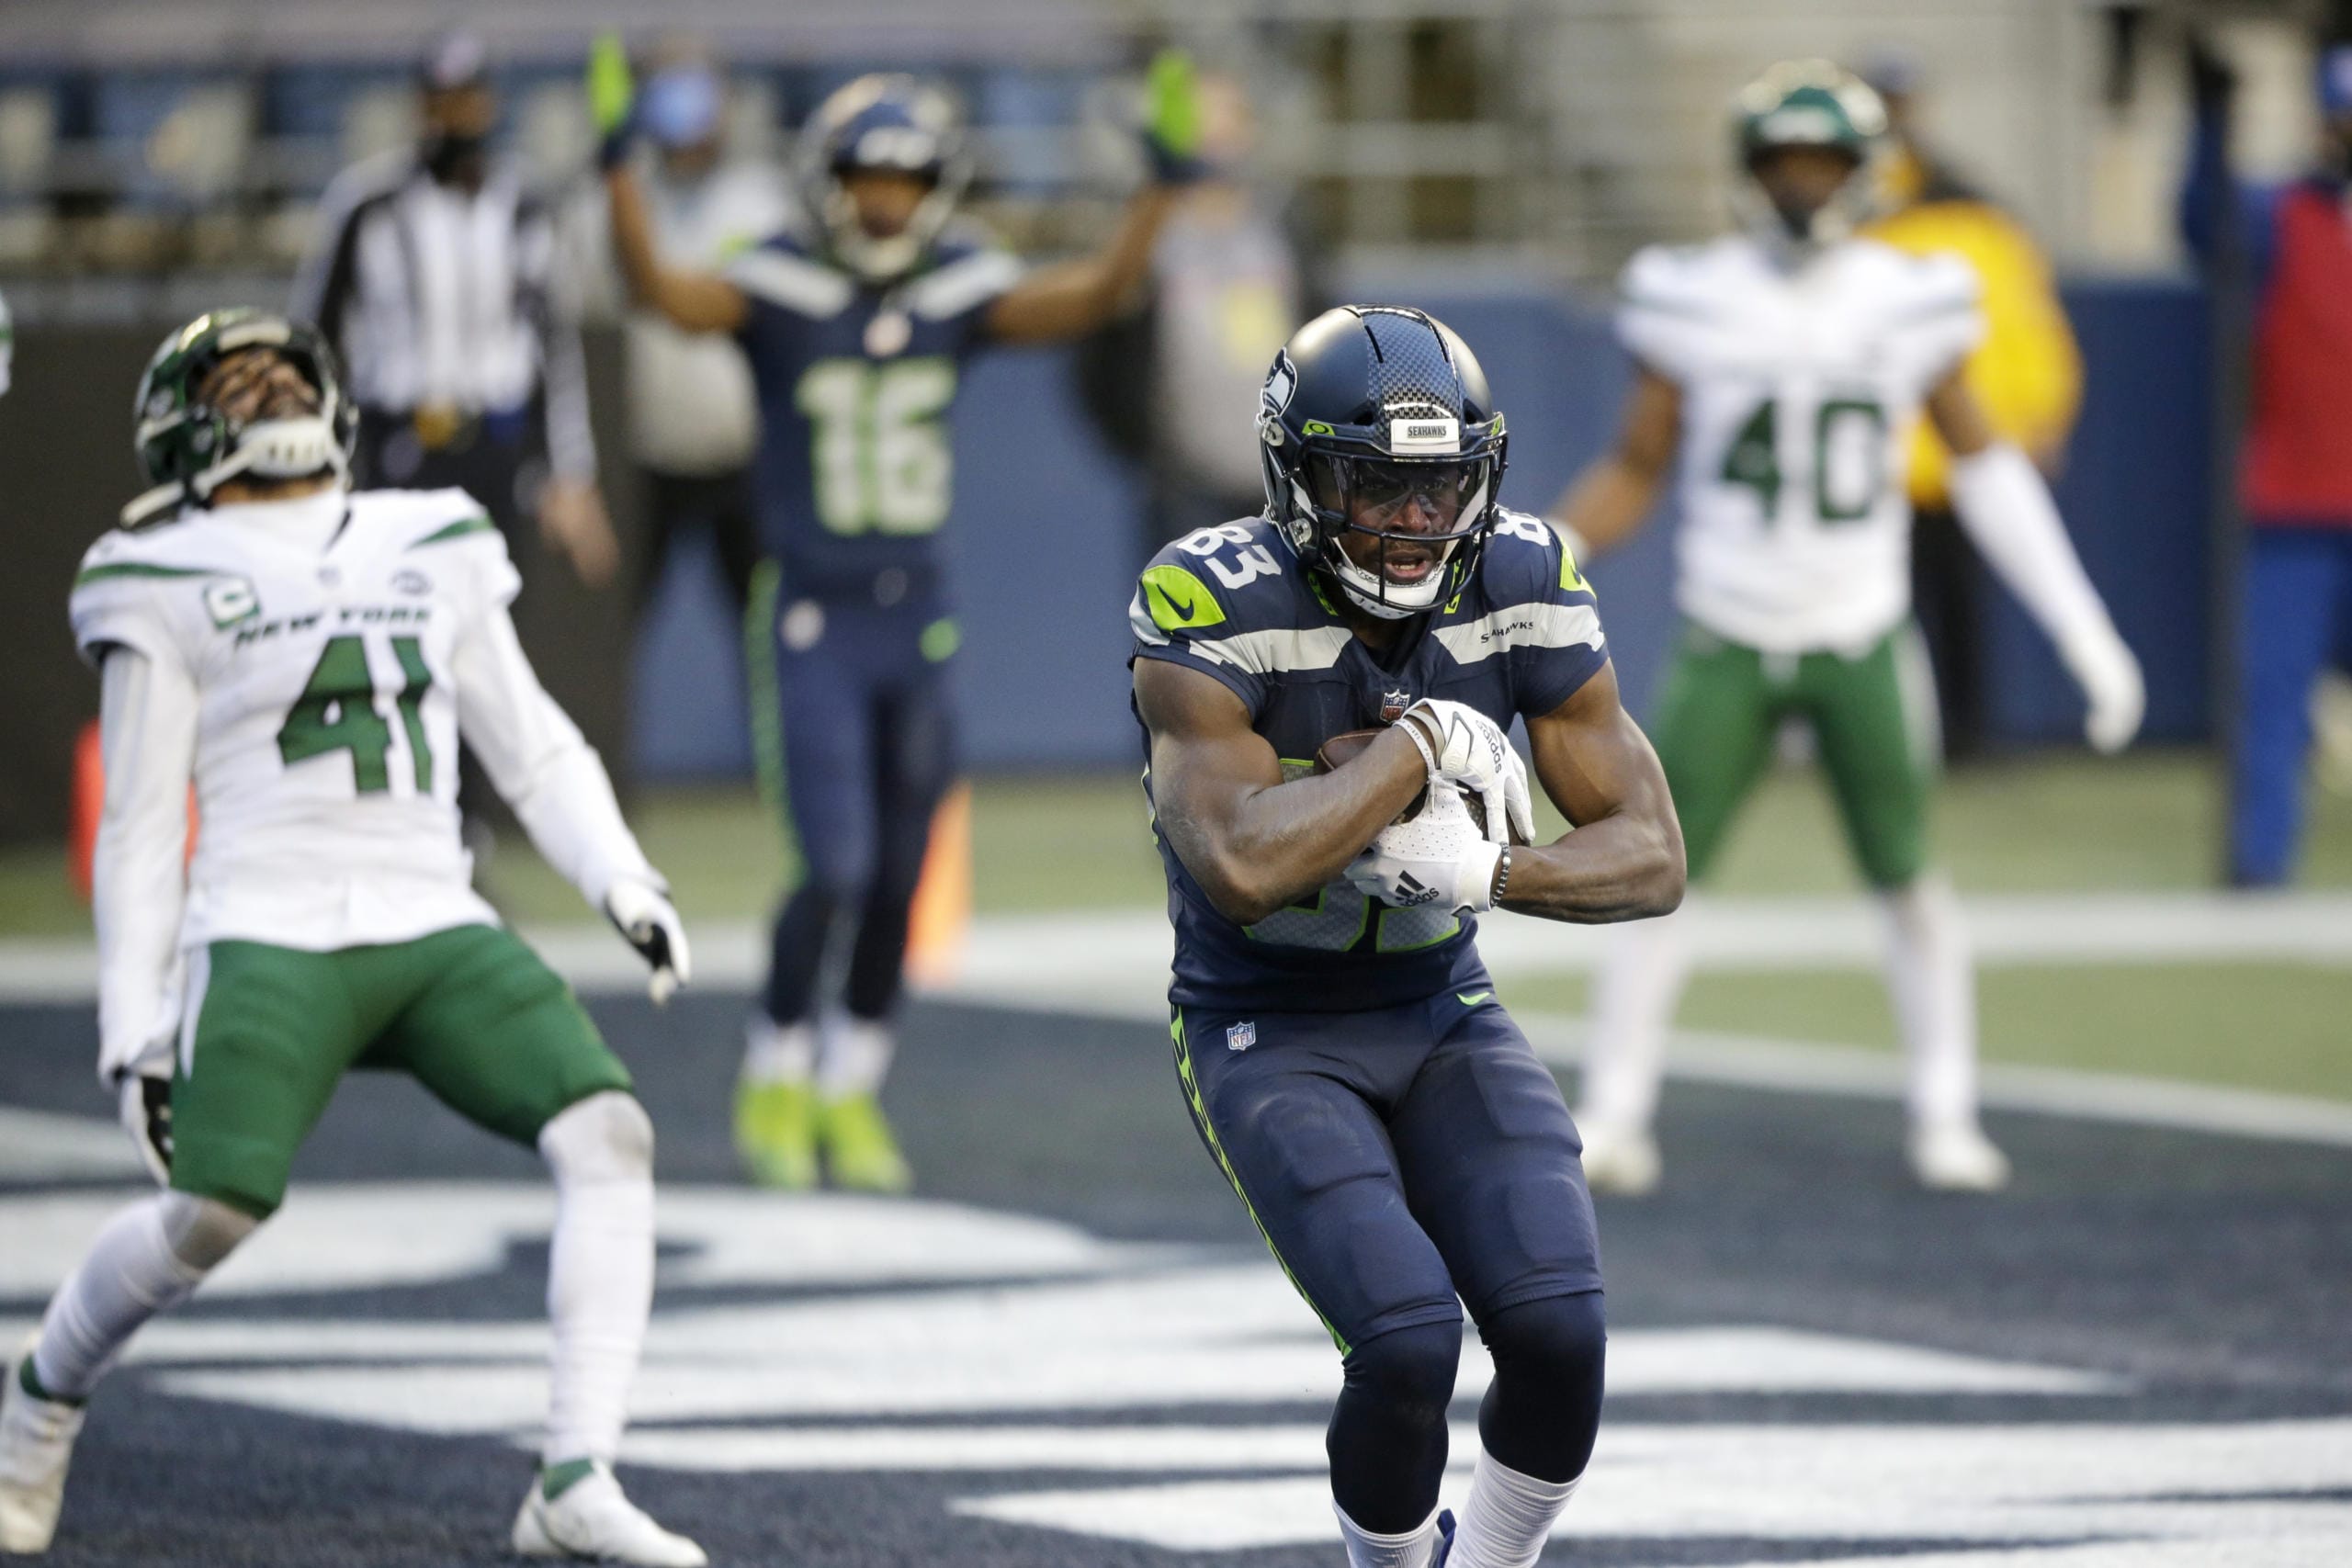 Seahawks rout winless Jets 40-3 - The Columbian